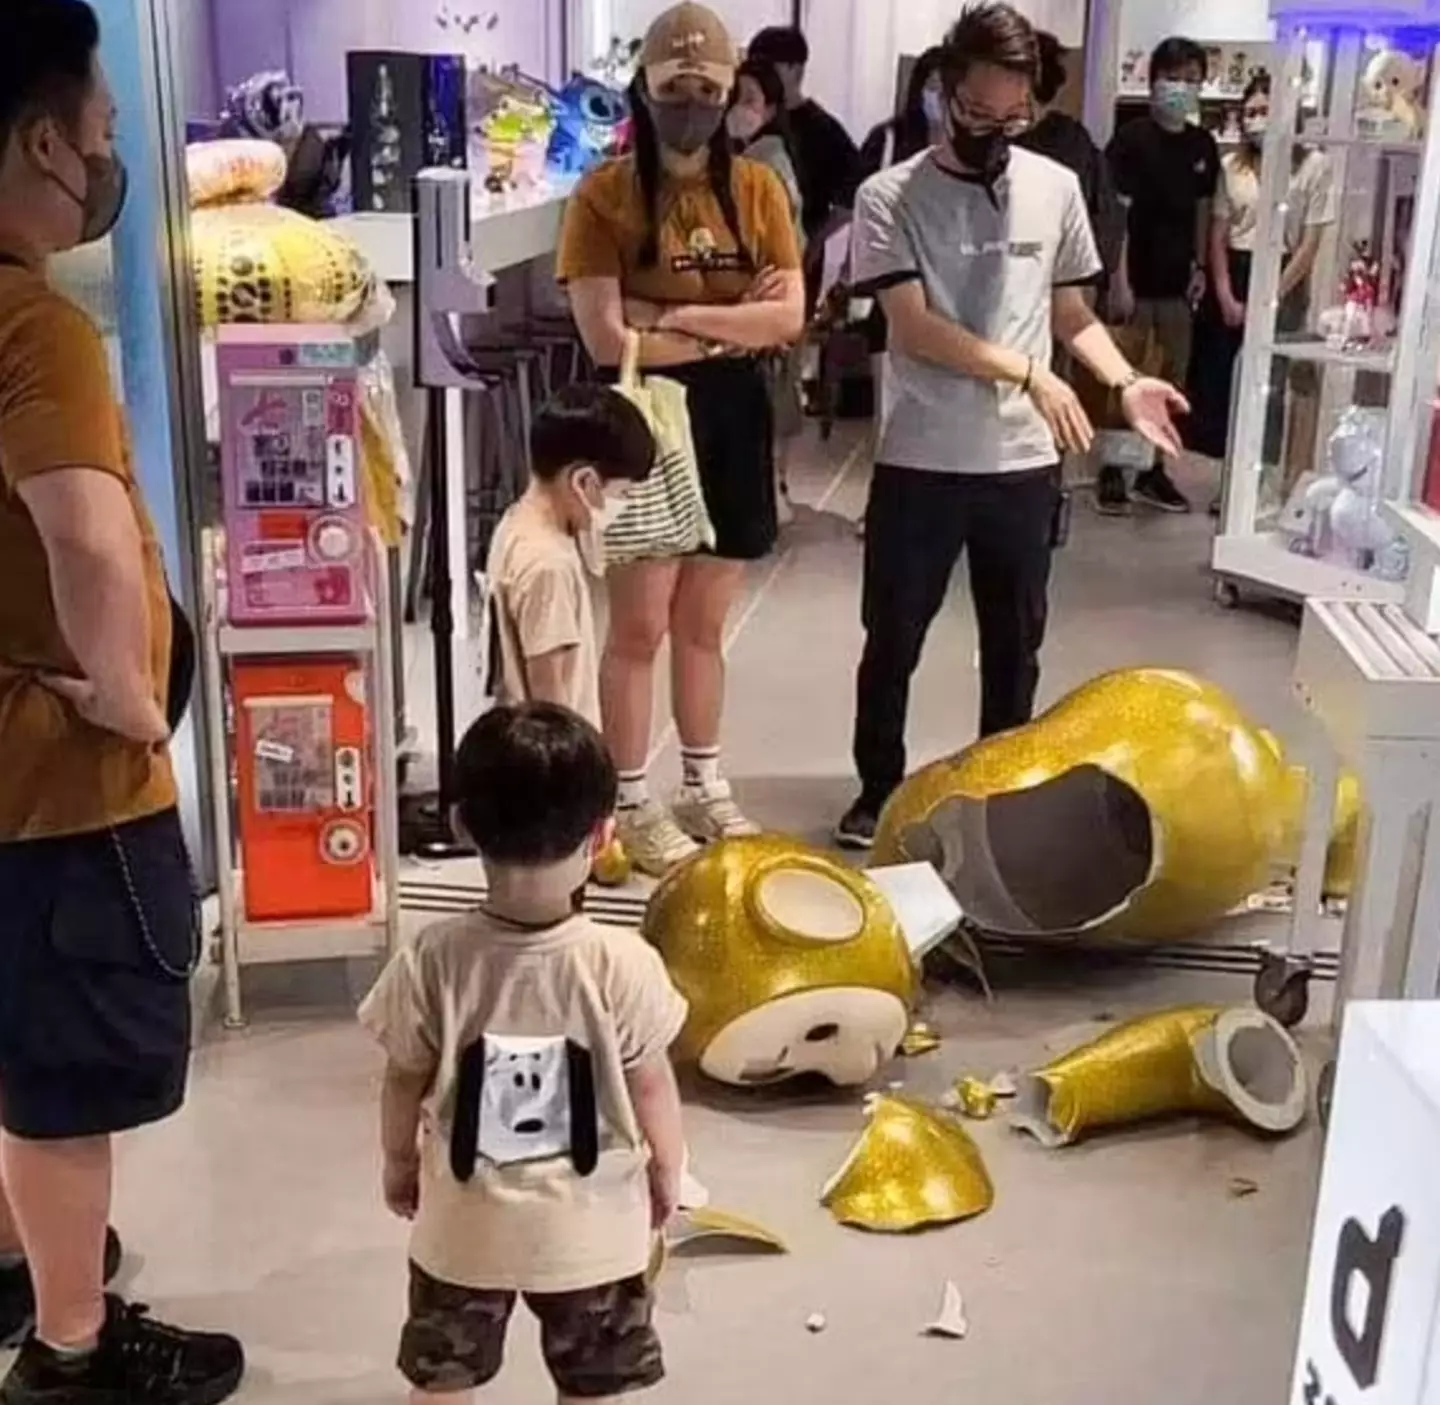 Cheng’s son knocked over the life-sized Teletubbies sculpture on Sunday.